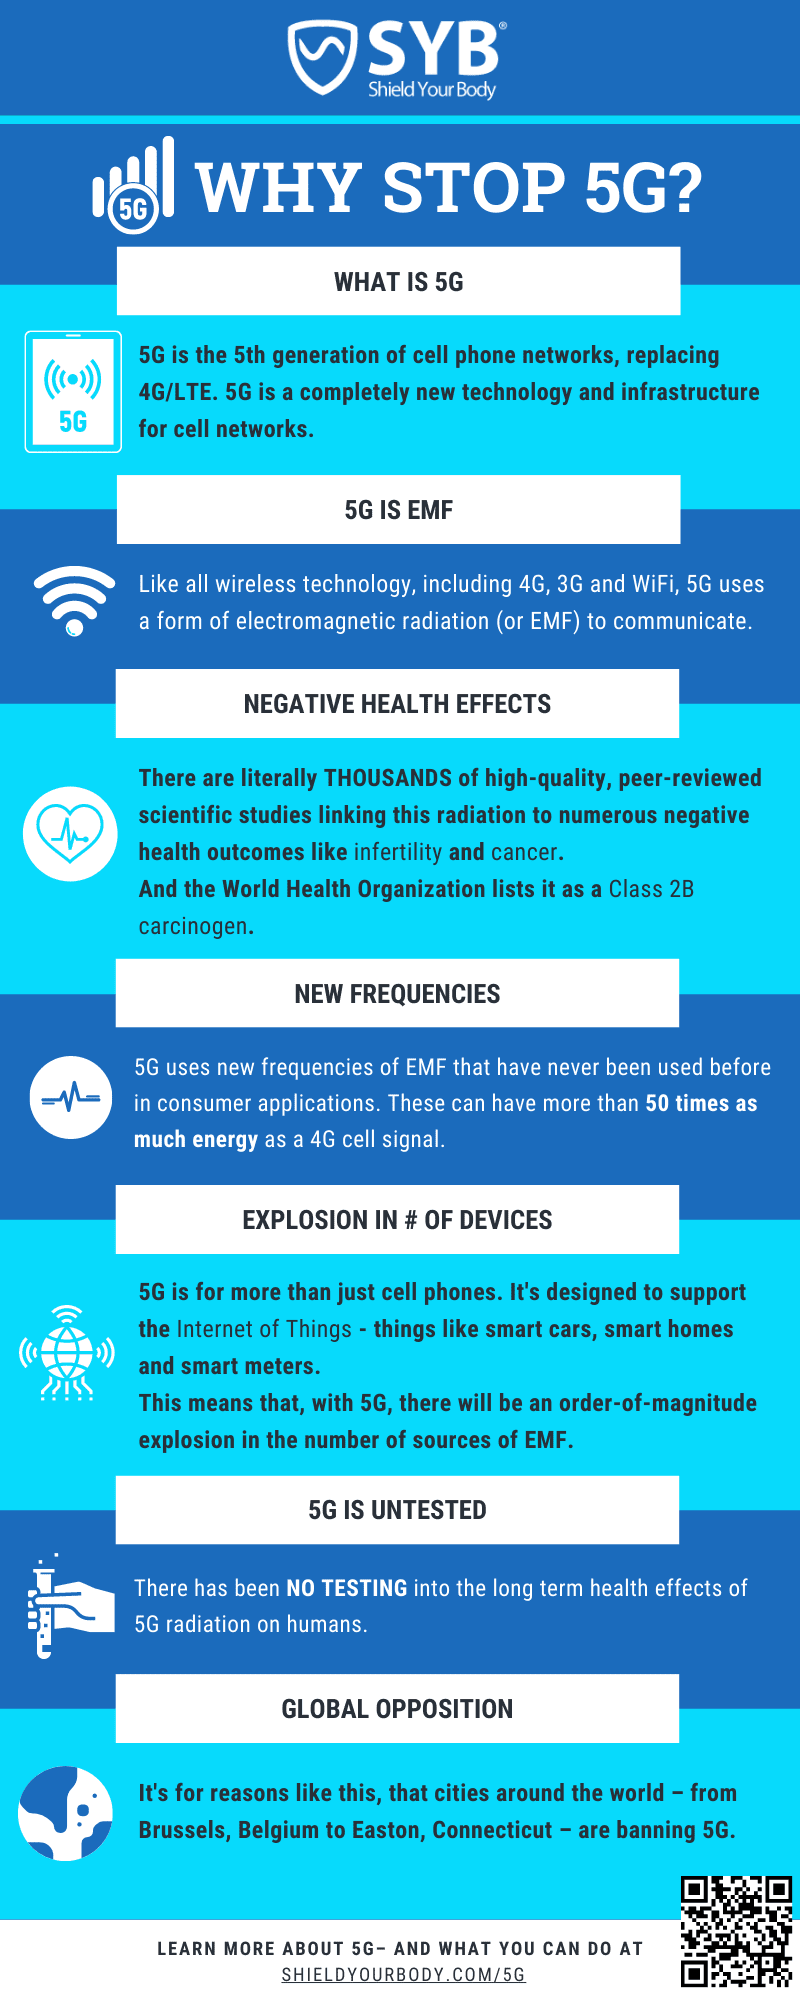 case study of 5g in health